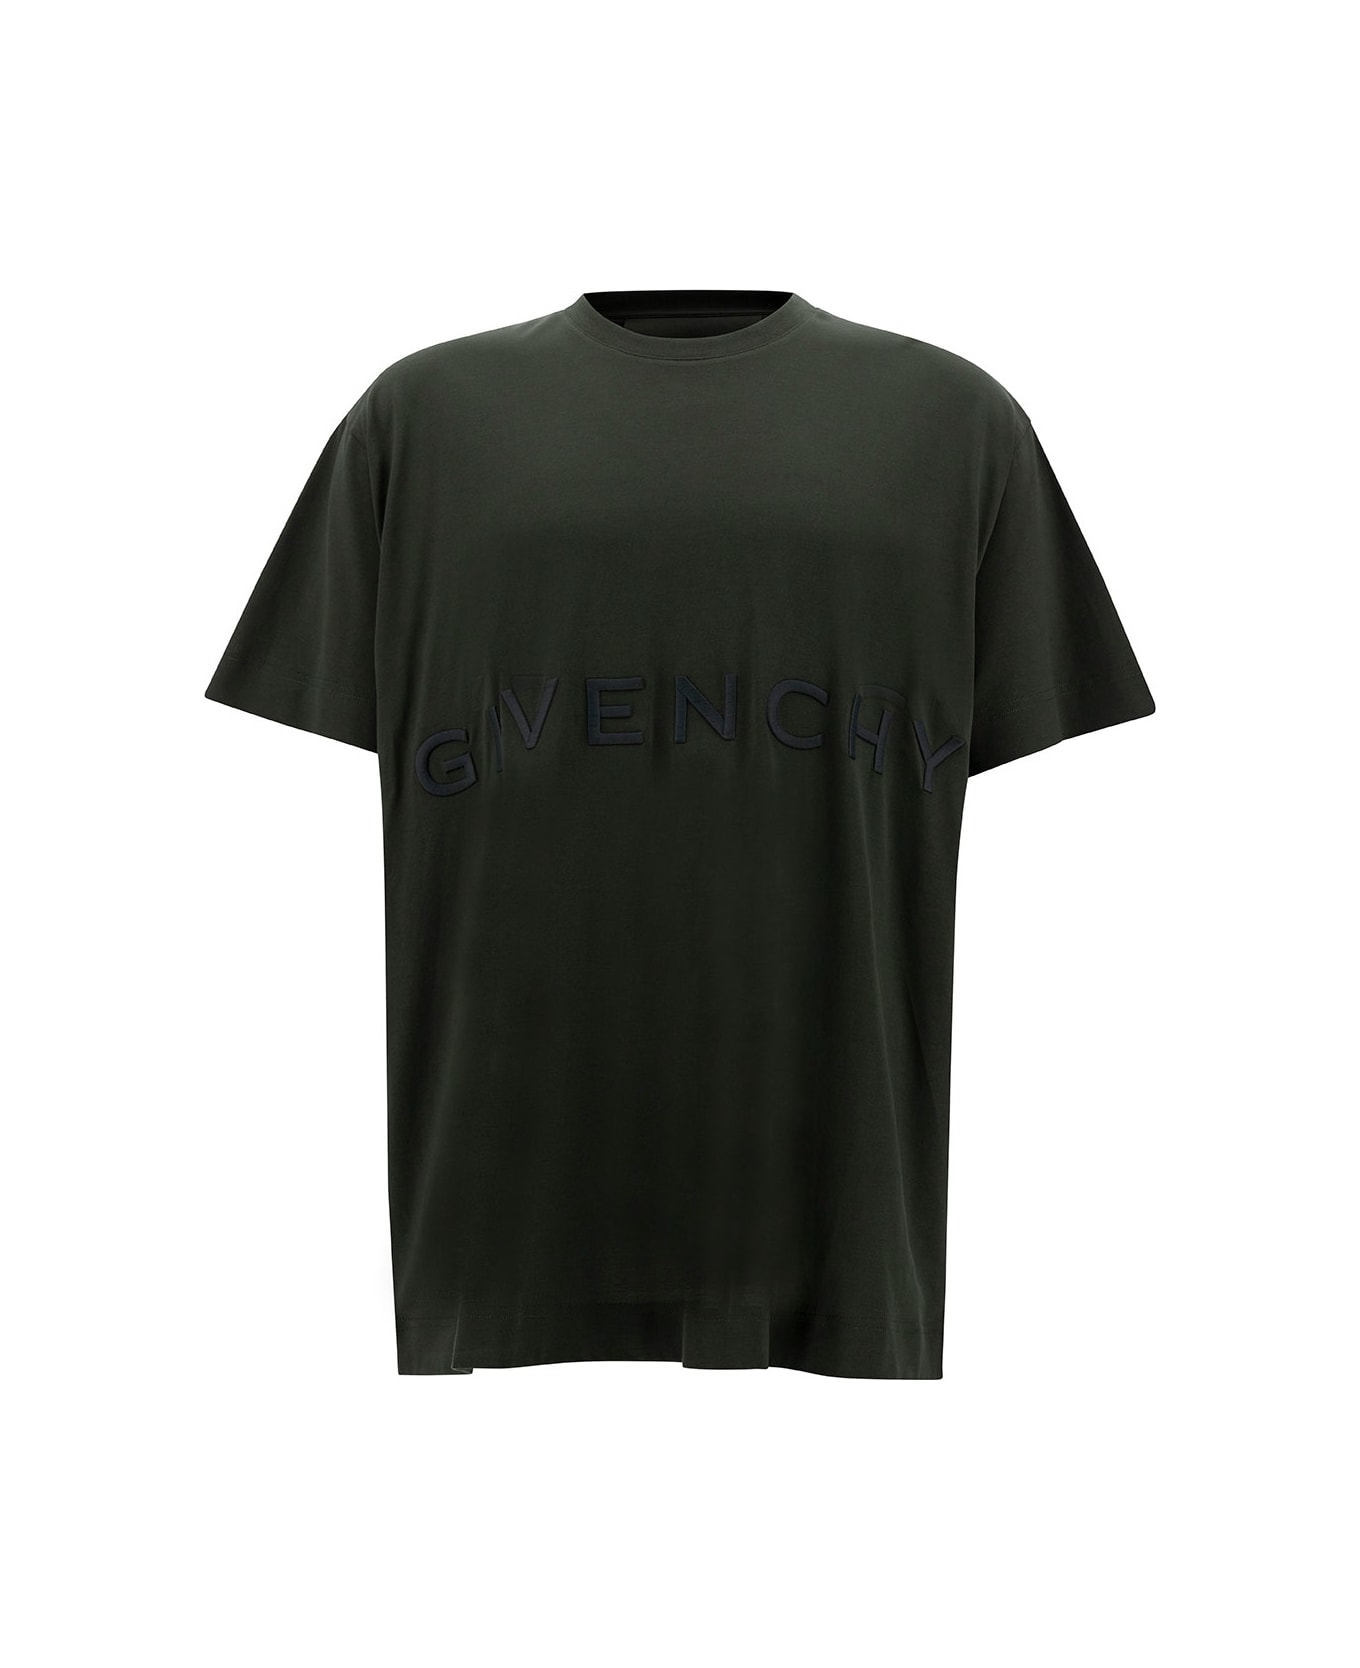 Givenchy Oversized T-shirt - Green